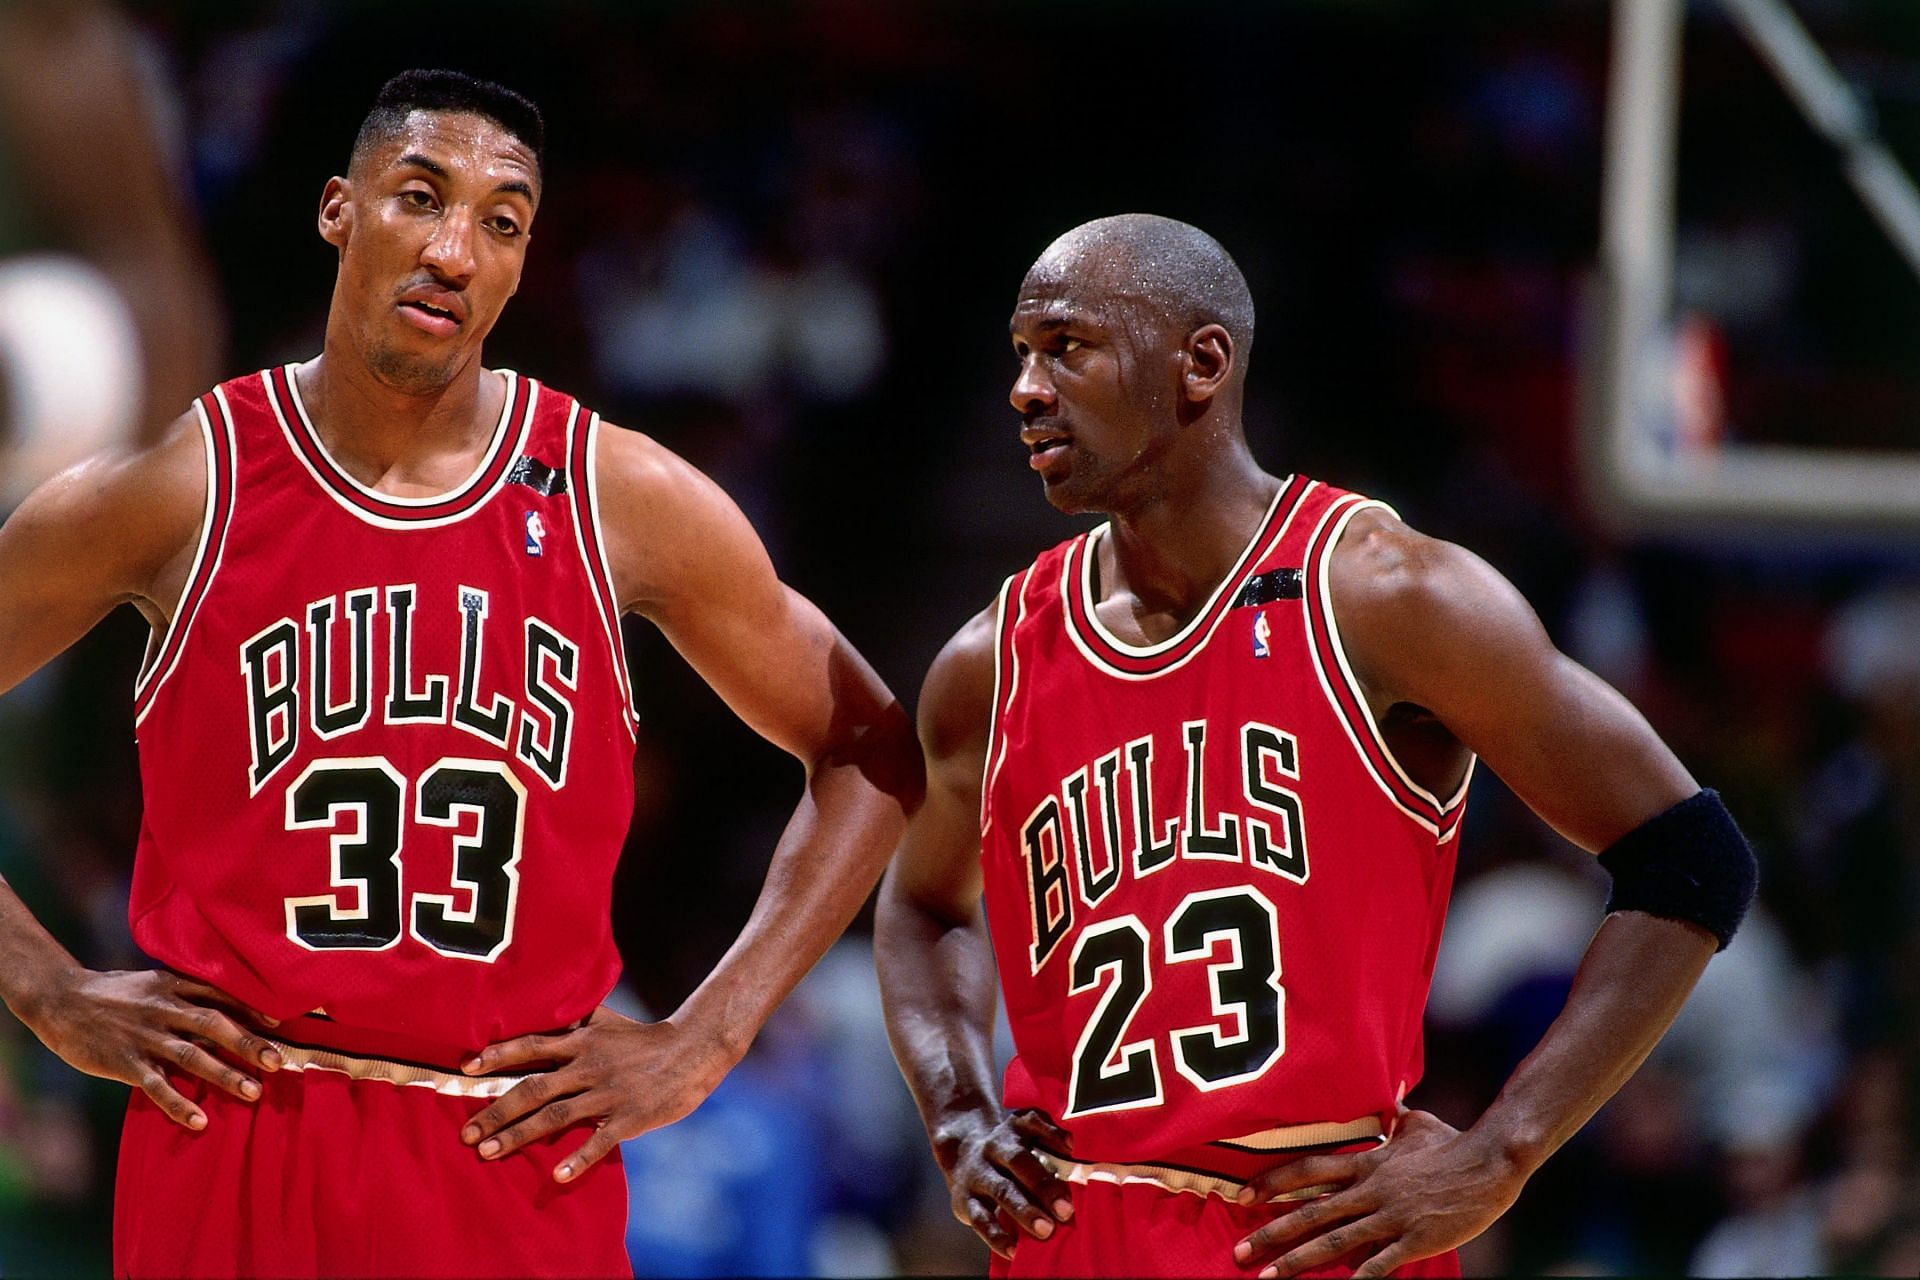 It will be interesting to see what stories Scottie Pippen talks about from his time with the Chicago Bulls